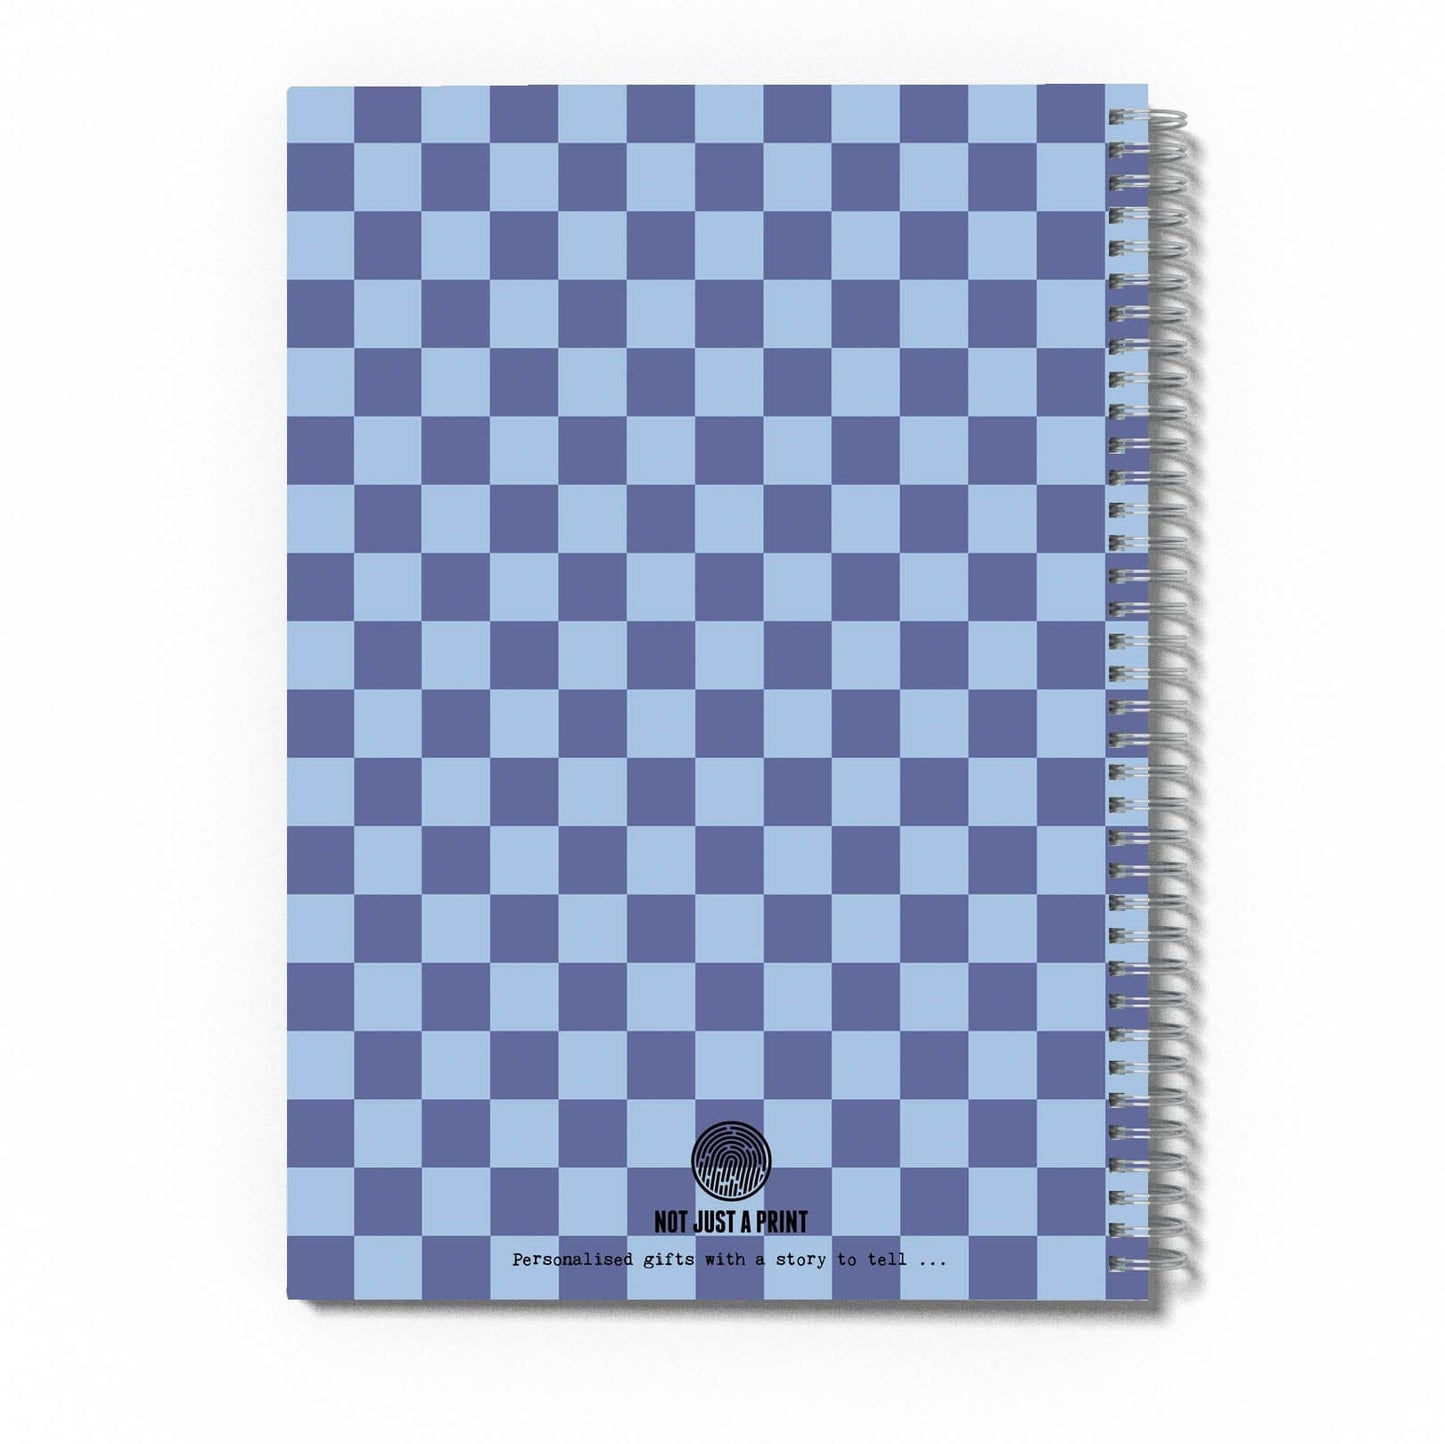 Personalised Blue Checkerboard Print A5 Spiral Bound Notebook